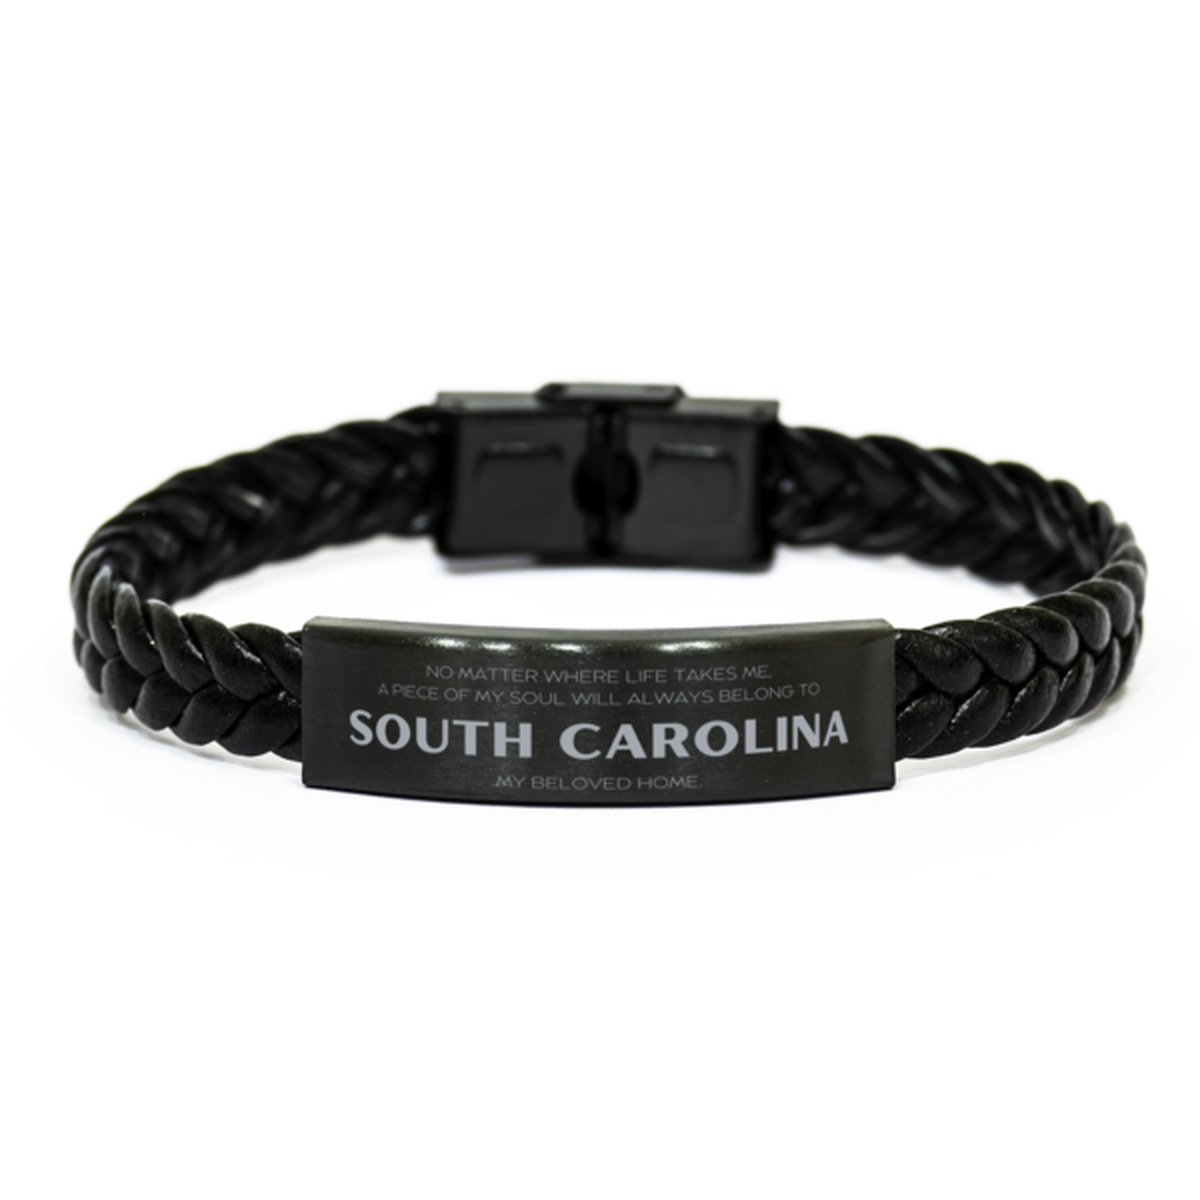 Love South Carolina State Gifts, My soul will always belong to South Carolina, Proud Braided Leather Bracelet, Birthday Unique Gifts For South Carolina Men, Women, Friends